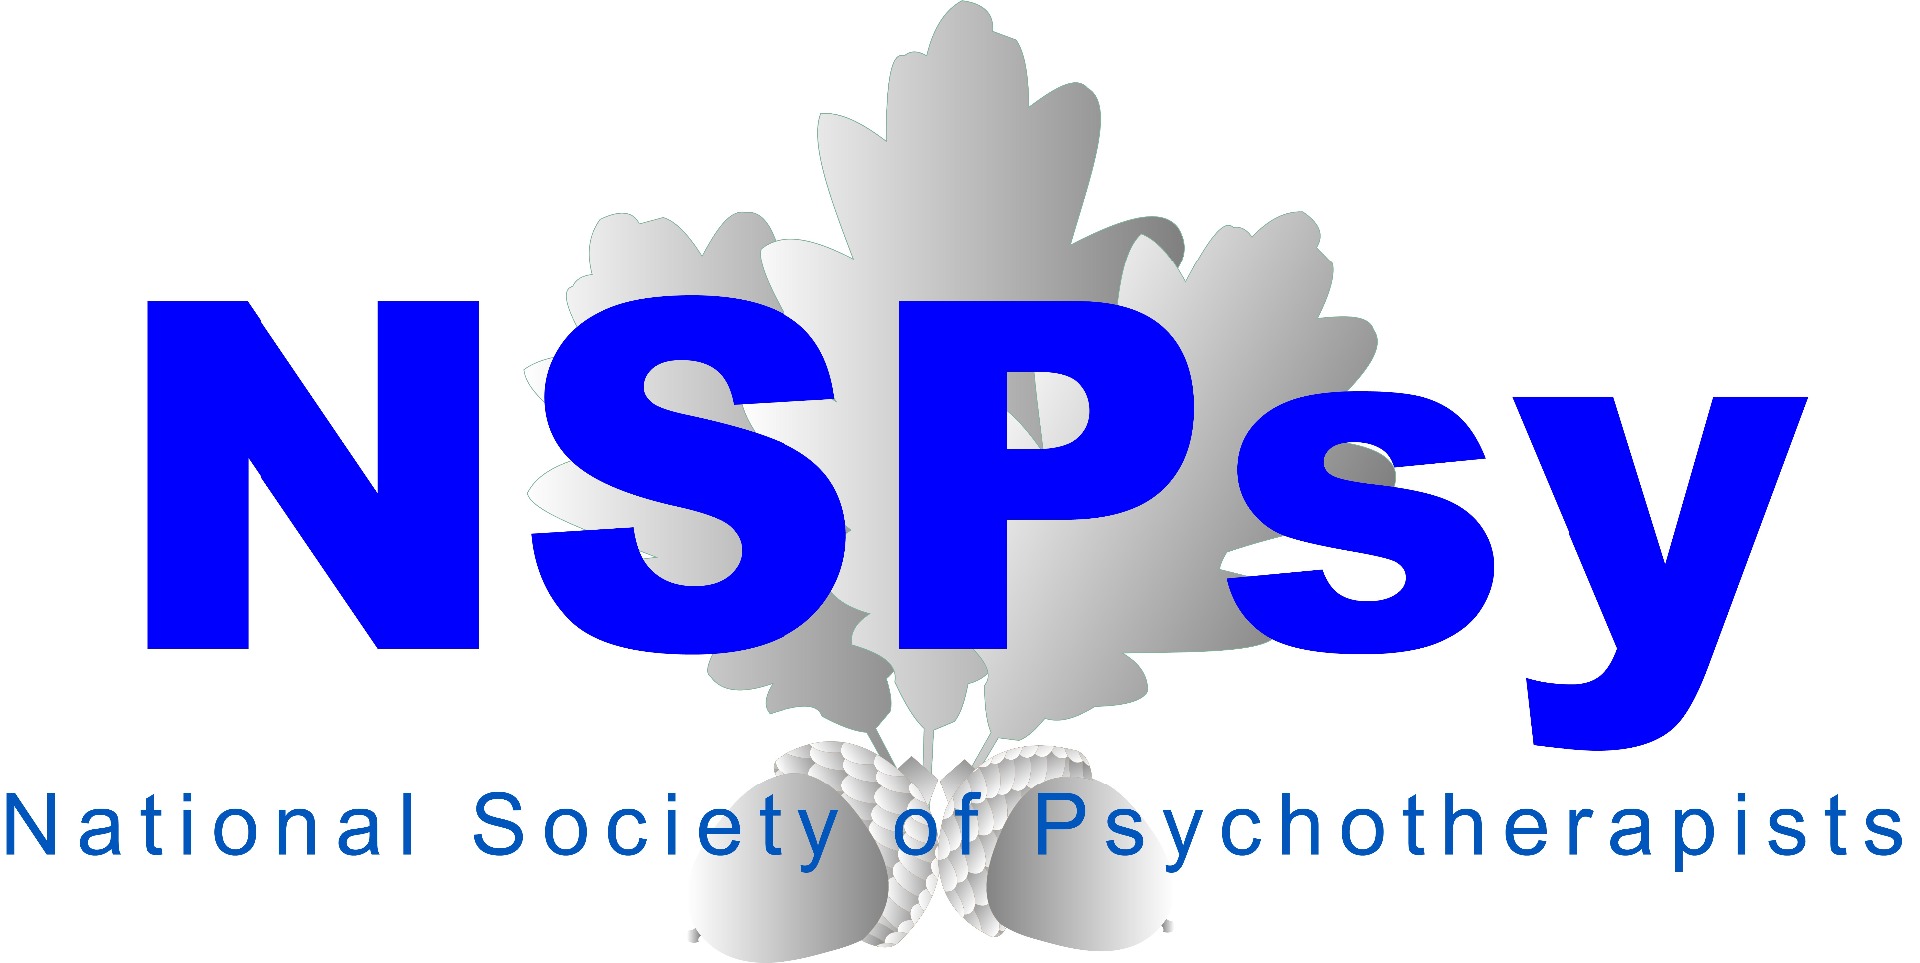 NSPsy supporting hypnotherapists in practice